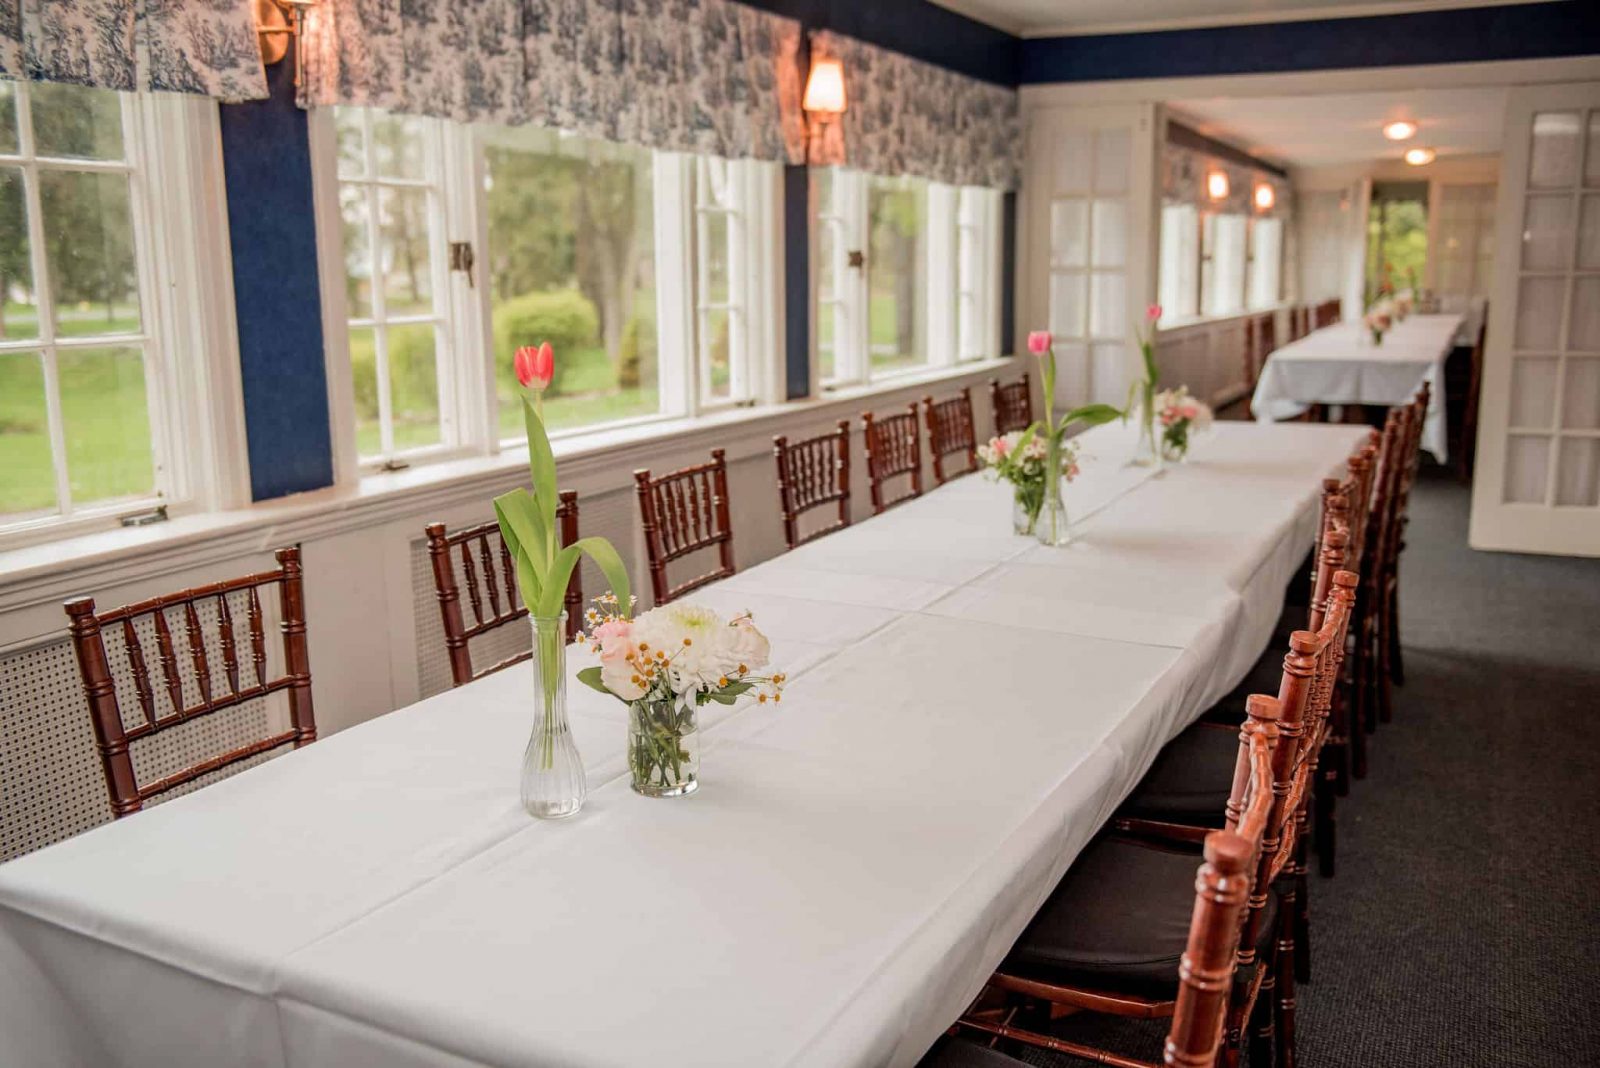 A dining table and windows in the quaint and intimate porches